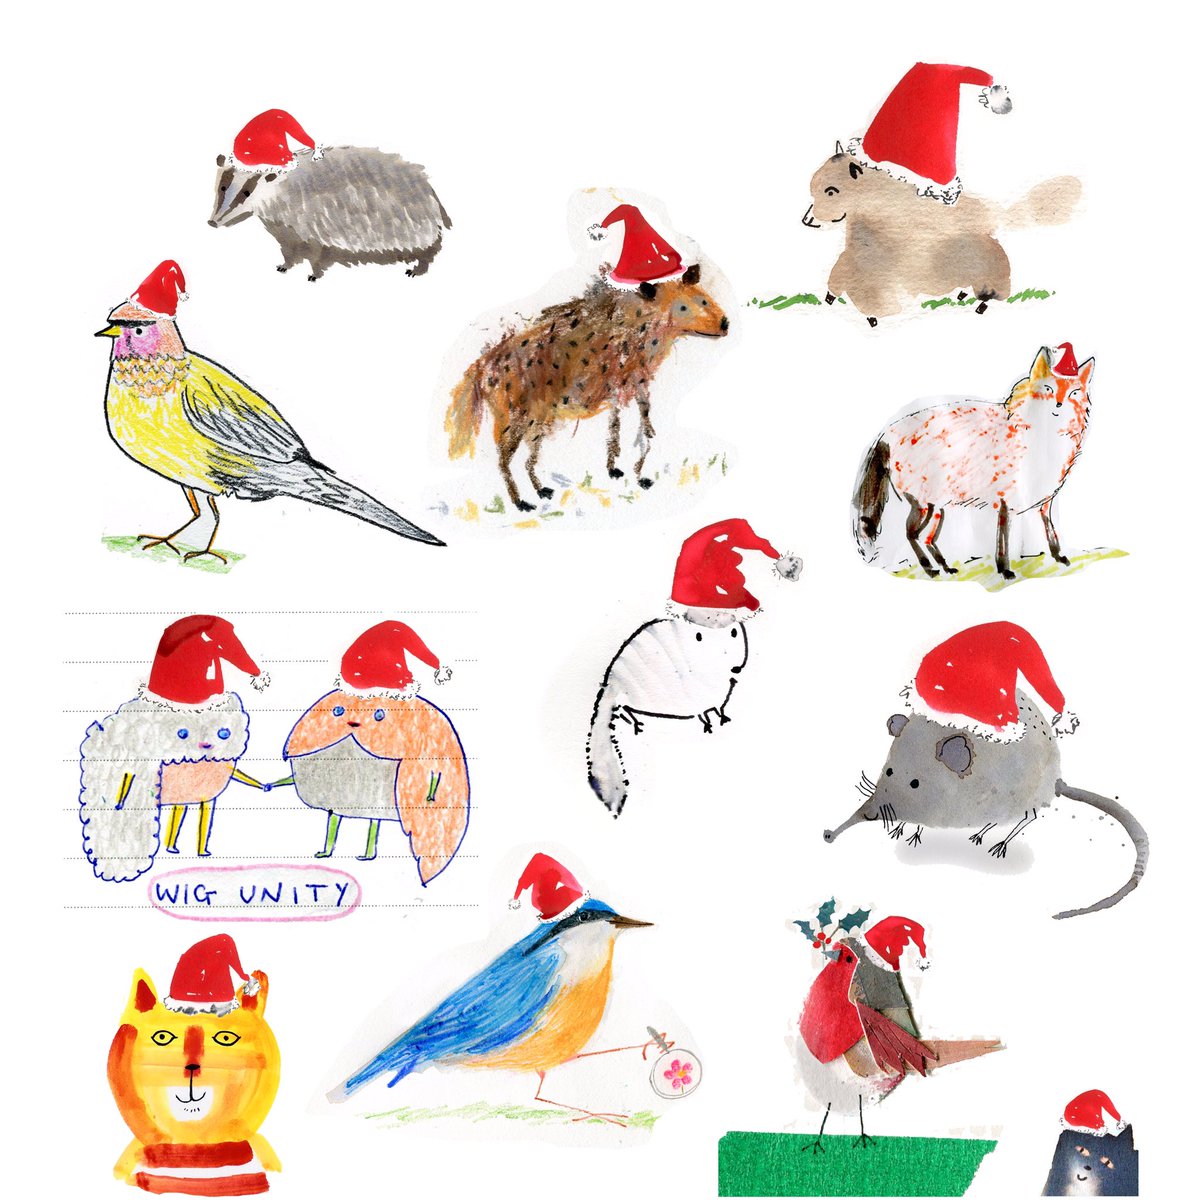 A few of my drawings from this year with added Christmas hats. 
#FestiveFun #colour_collective #ArtistOnTwitter #thedailysketch